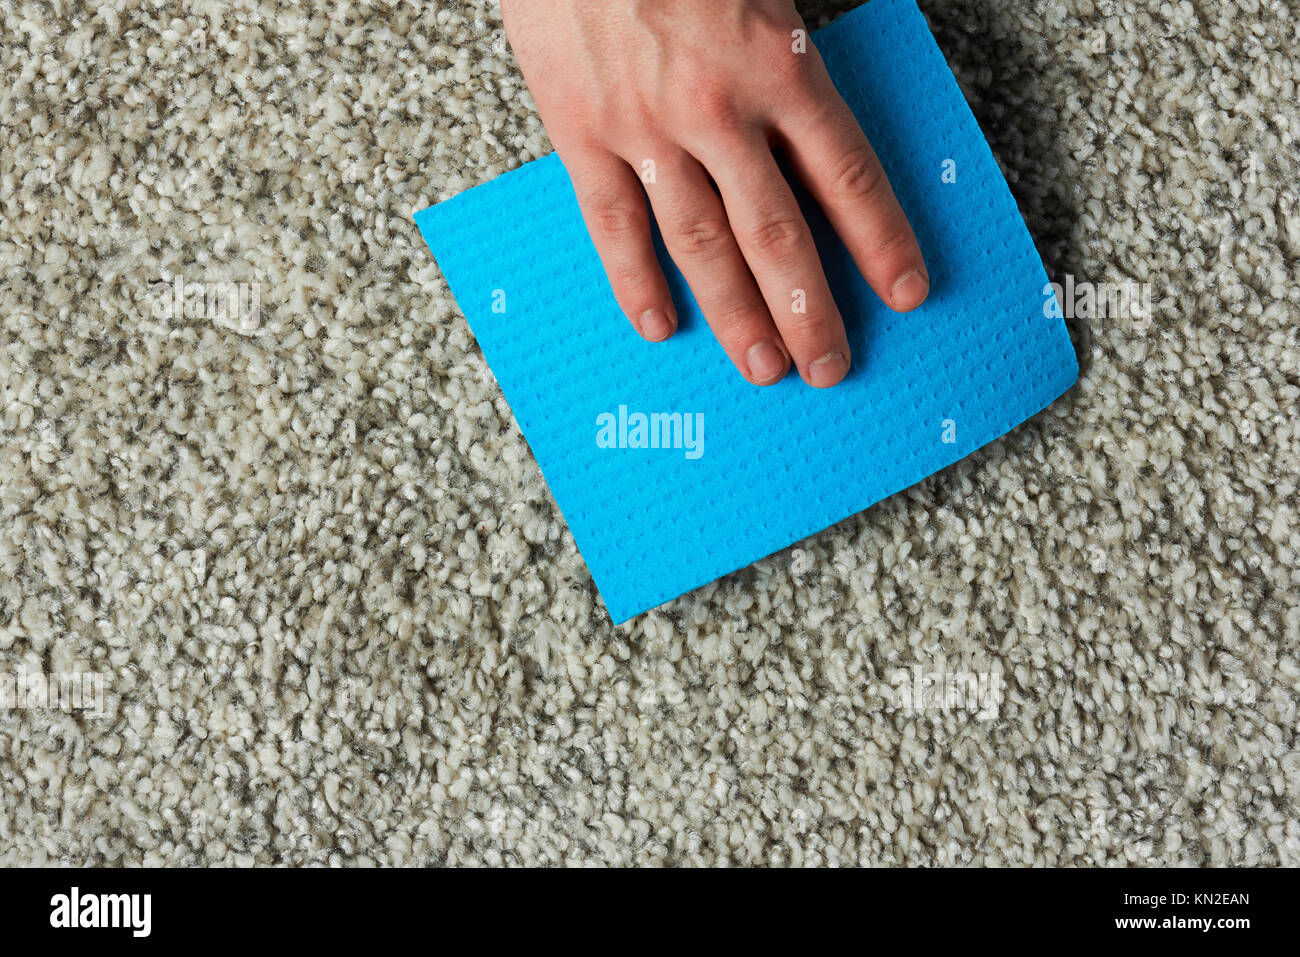 Covering dirty spot on carpet with blue napkin Stock Photo